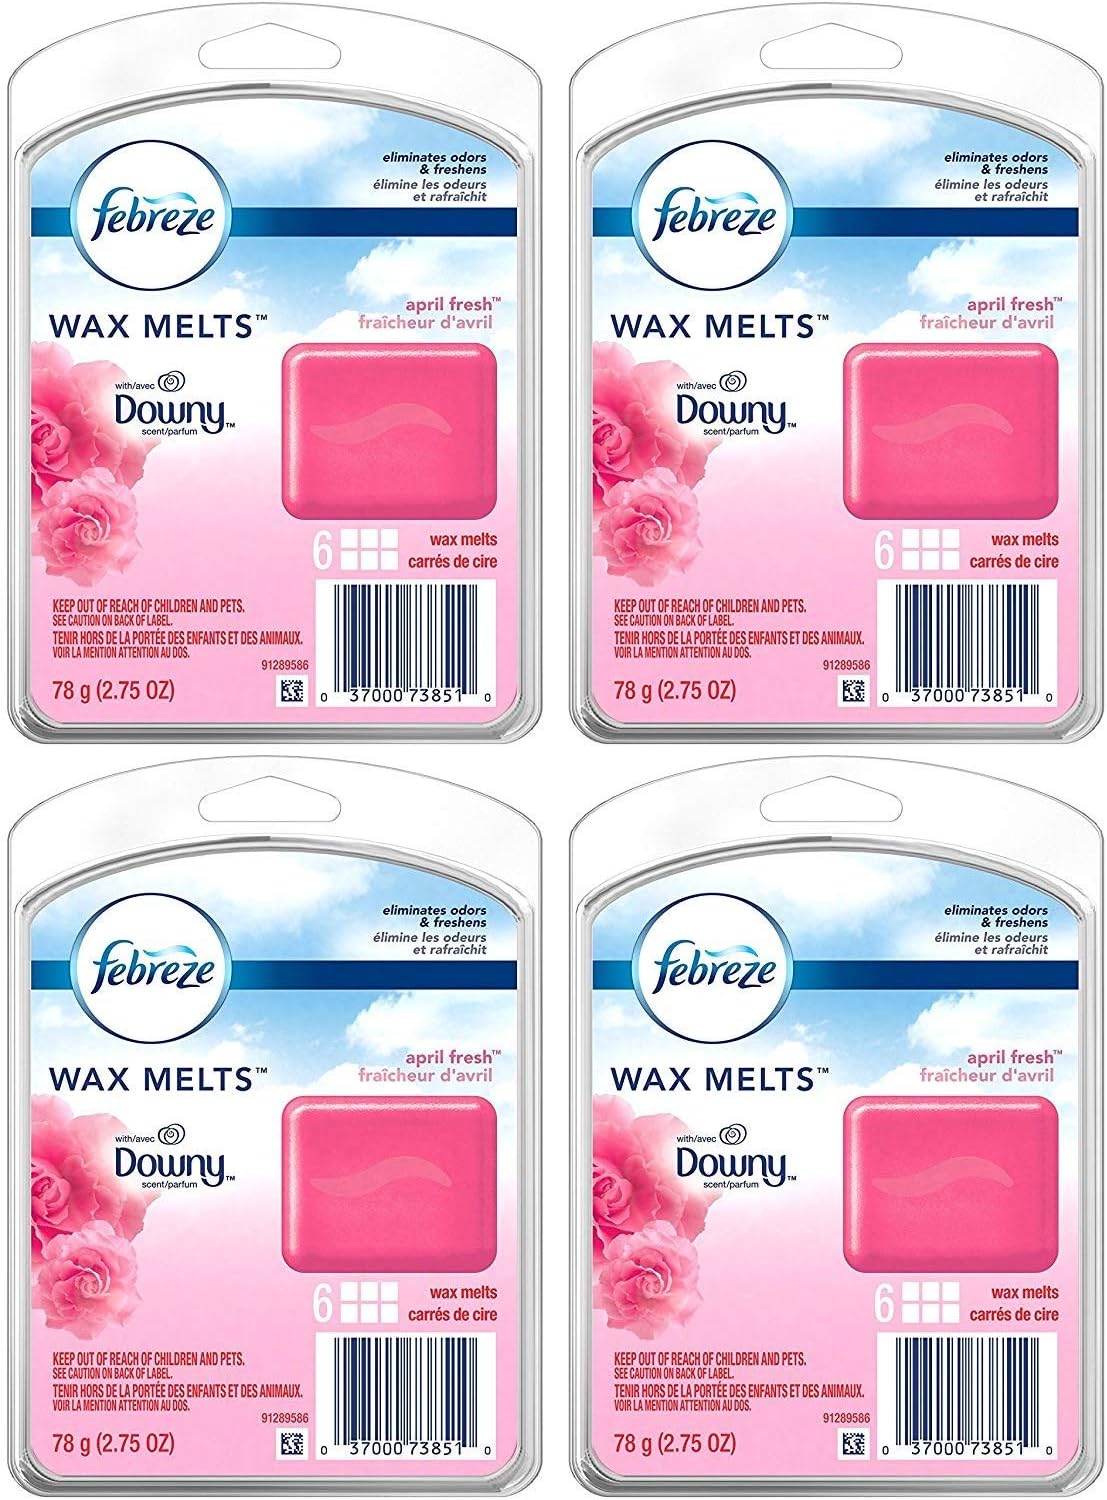 Febreze Wax Melts Air Freshener - with Downy April Fresh Scent - Net Wt. 2.75 OZ (78 g) Per Package - Pack of 4 Packages